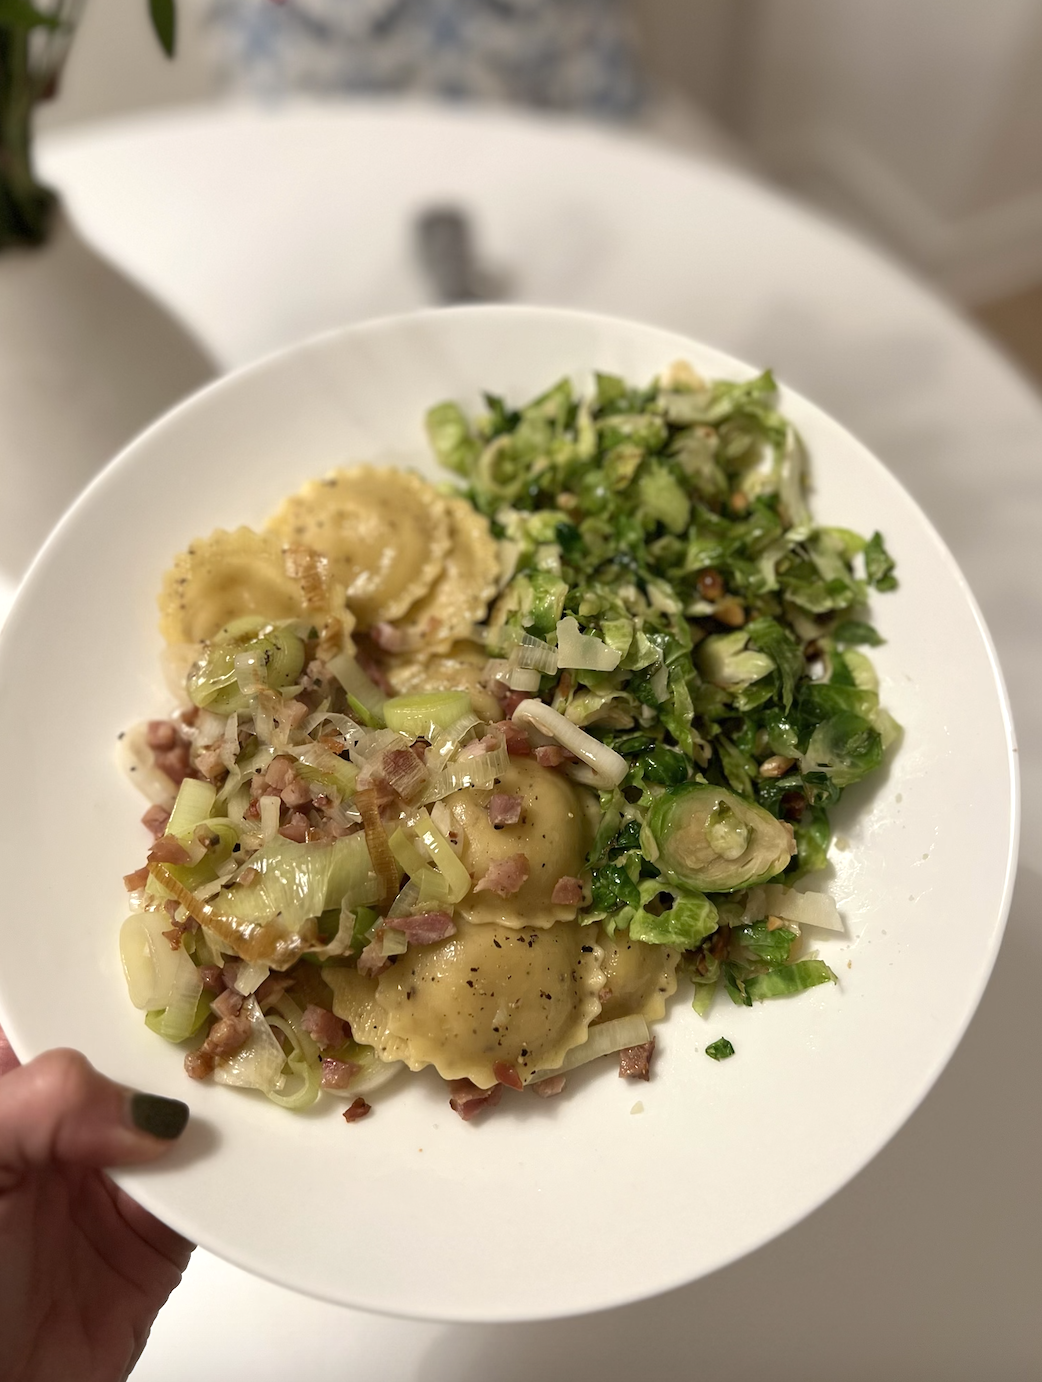 Plate of ravioli with Brussels sprouts and pancetta topping